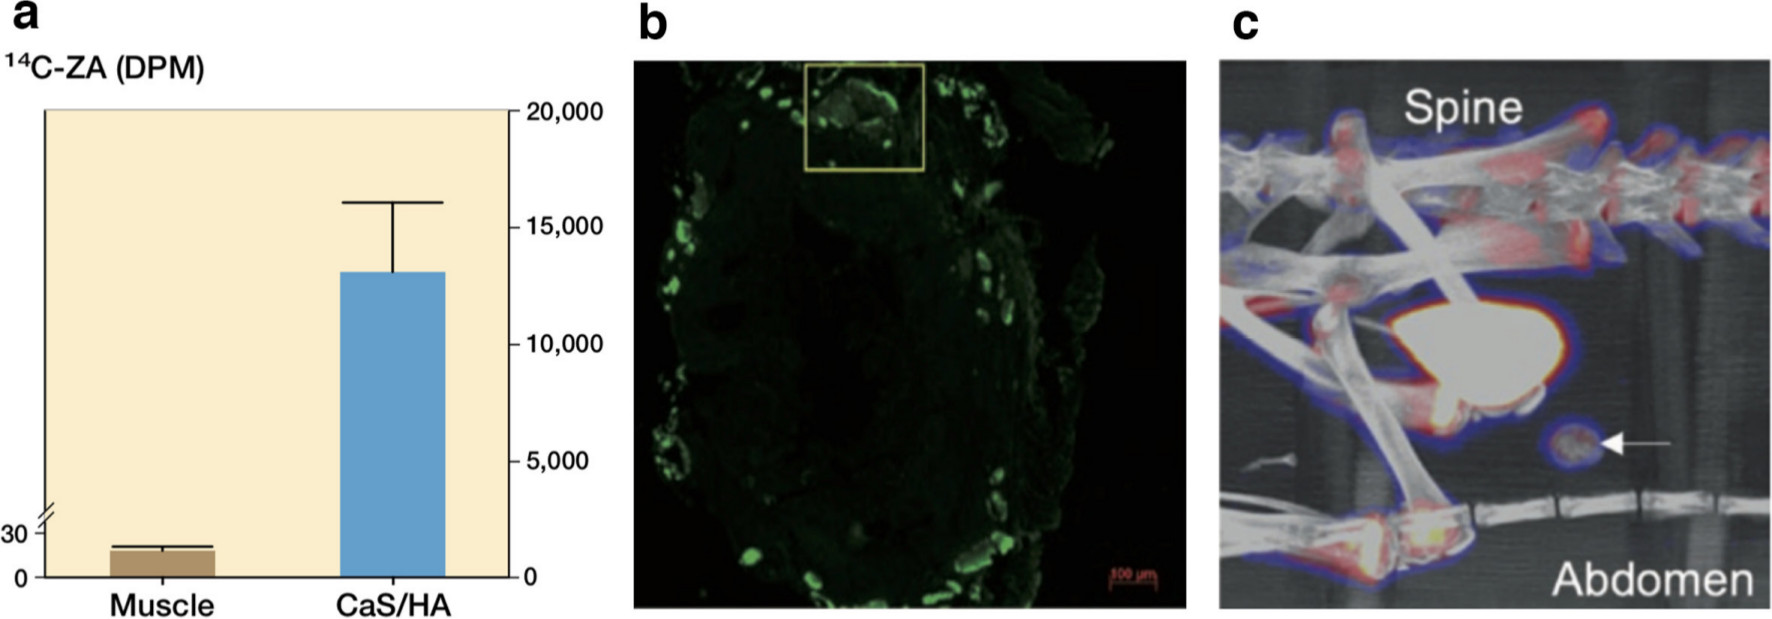 Fig. 3 
          Hydroxyapatite (HA) as a recruiting platform for systemically circulating drugs in rats. a) Uptake of 14C-zoledronic acid (ZA) in a pellet of calcium sulphate (CaS)/HA implanted in the abdominal muscle pouch. ZA was injected subcutaneously, two weeks post-implantation of CaS/HA biomaterial and animals were euthanized 24 hours later. b) and c) show the uptake of antibiotic tetracycline (injected subcutaneously) and radioactive tracer 18F (intravenous injection) in a pellet of CaS/HA biomaterial placed in the abdominal muscle pouch. Tetracycline uptake was measured using fluorescence microscopy while 18F uptake was accessed using positron emission tomography-CT. Figure has been modified from Raina et al.28
        